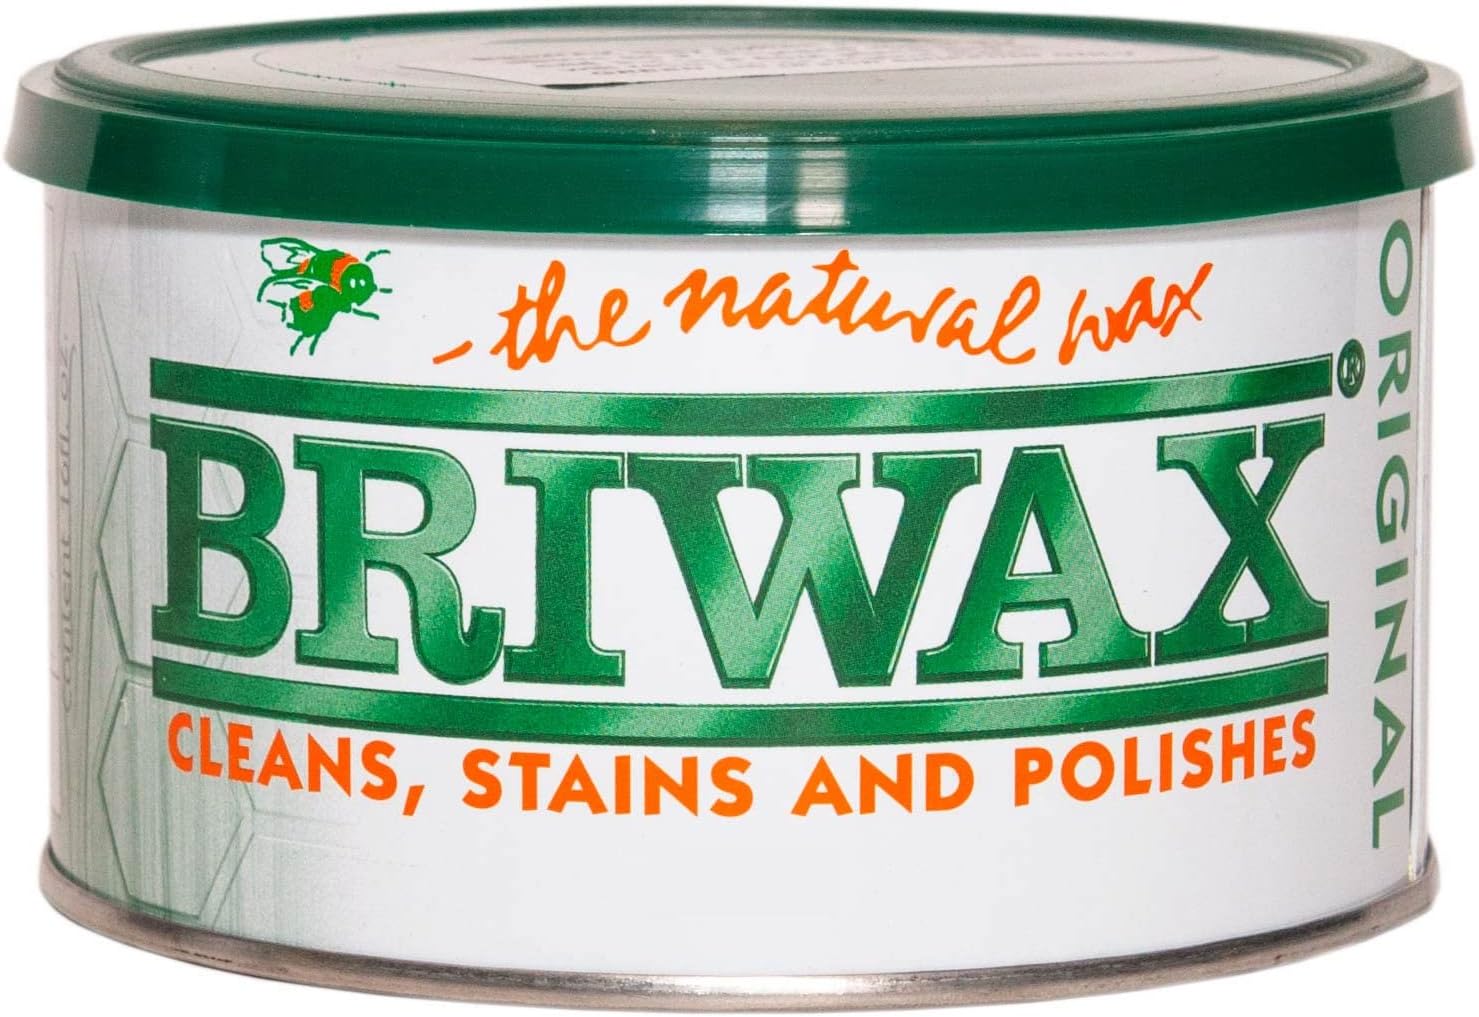 Briwax Mid Brown (previously Dark Oak) Furniture Wax Polish, Cleans, stains, and polishes